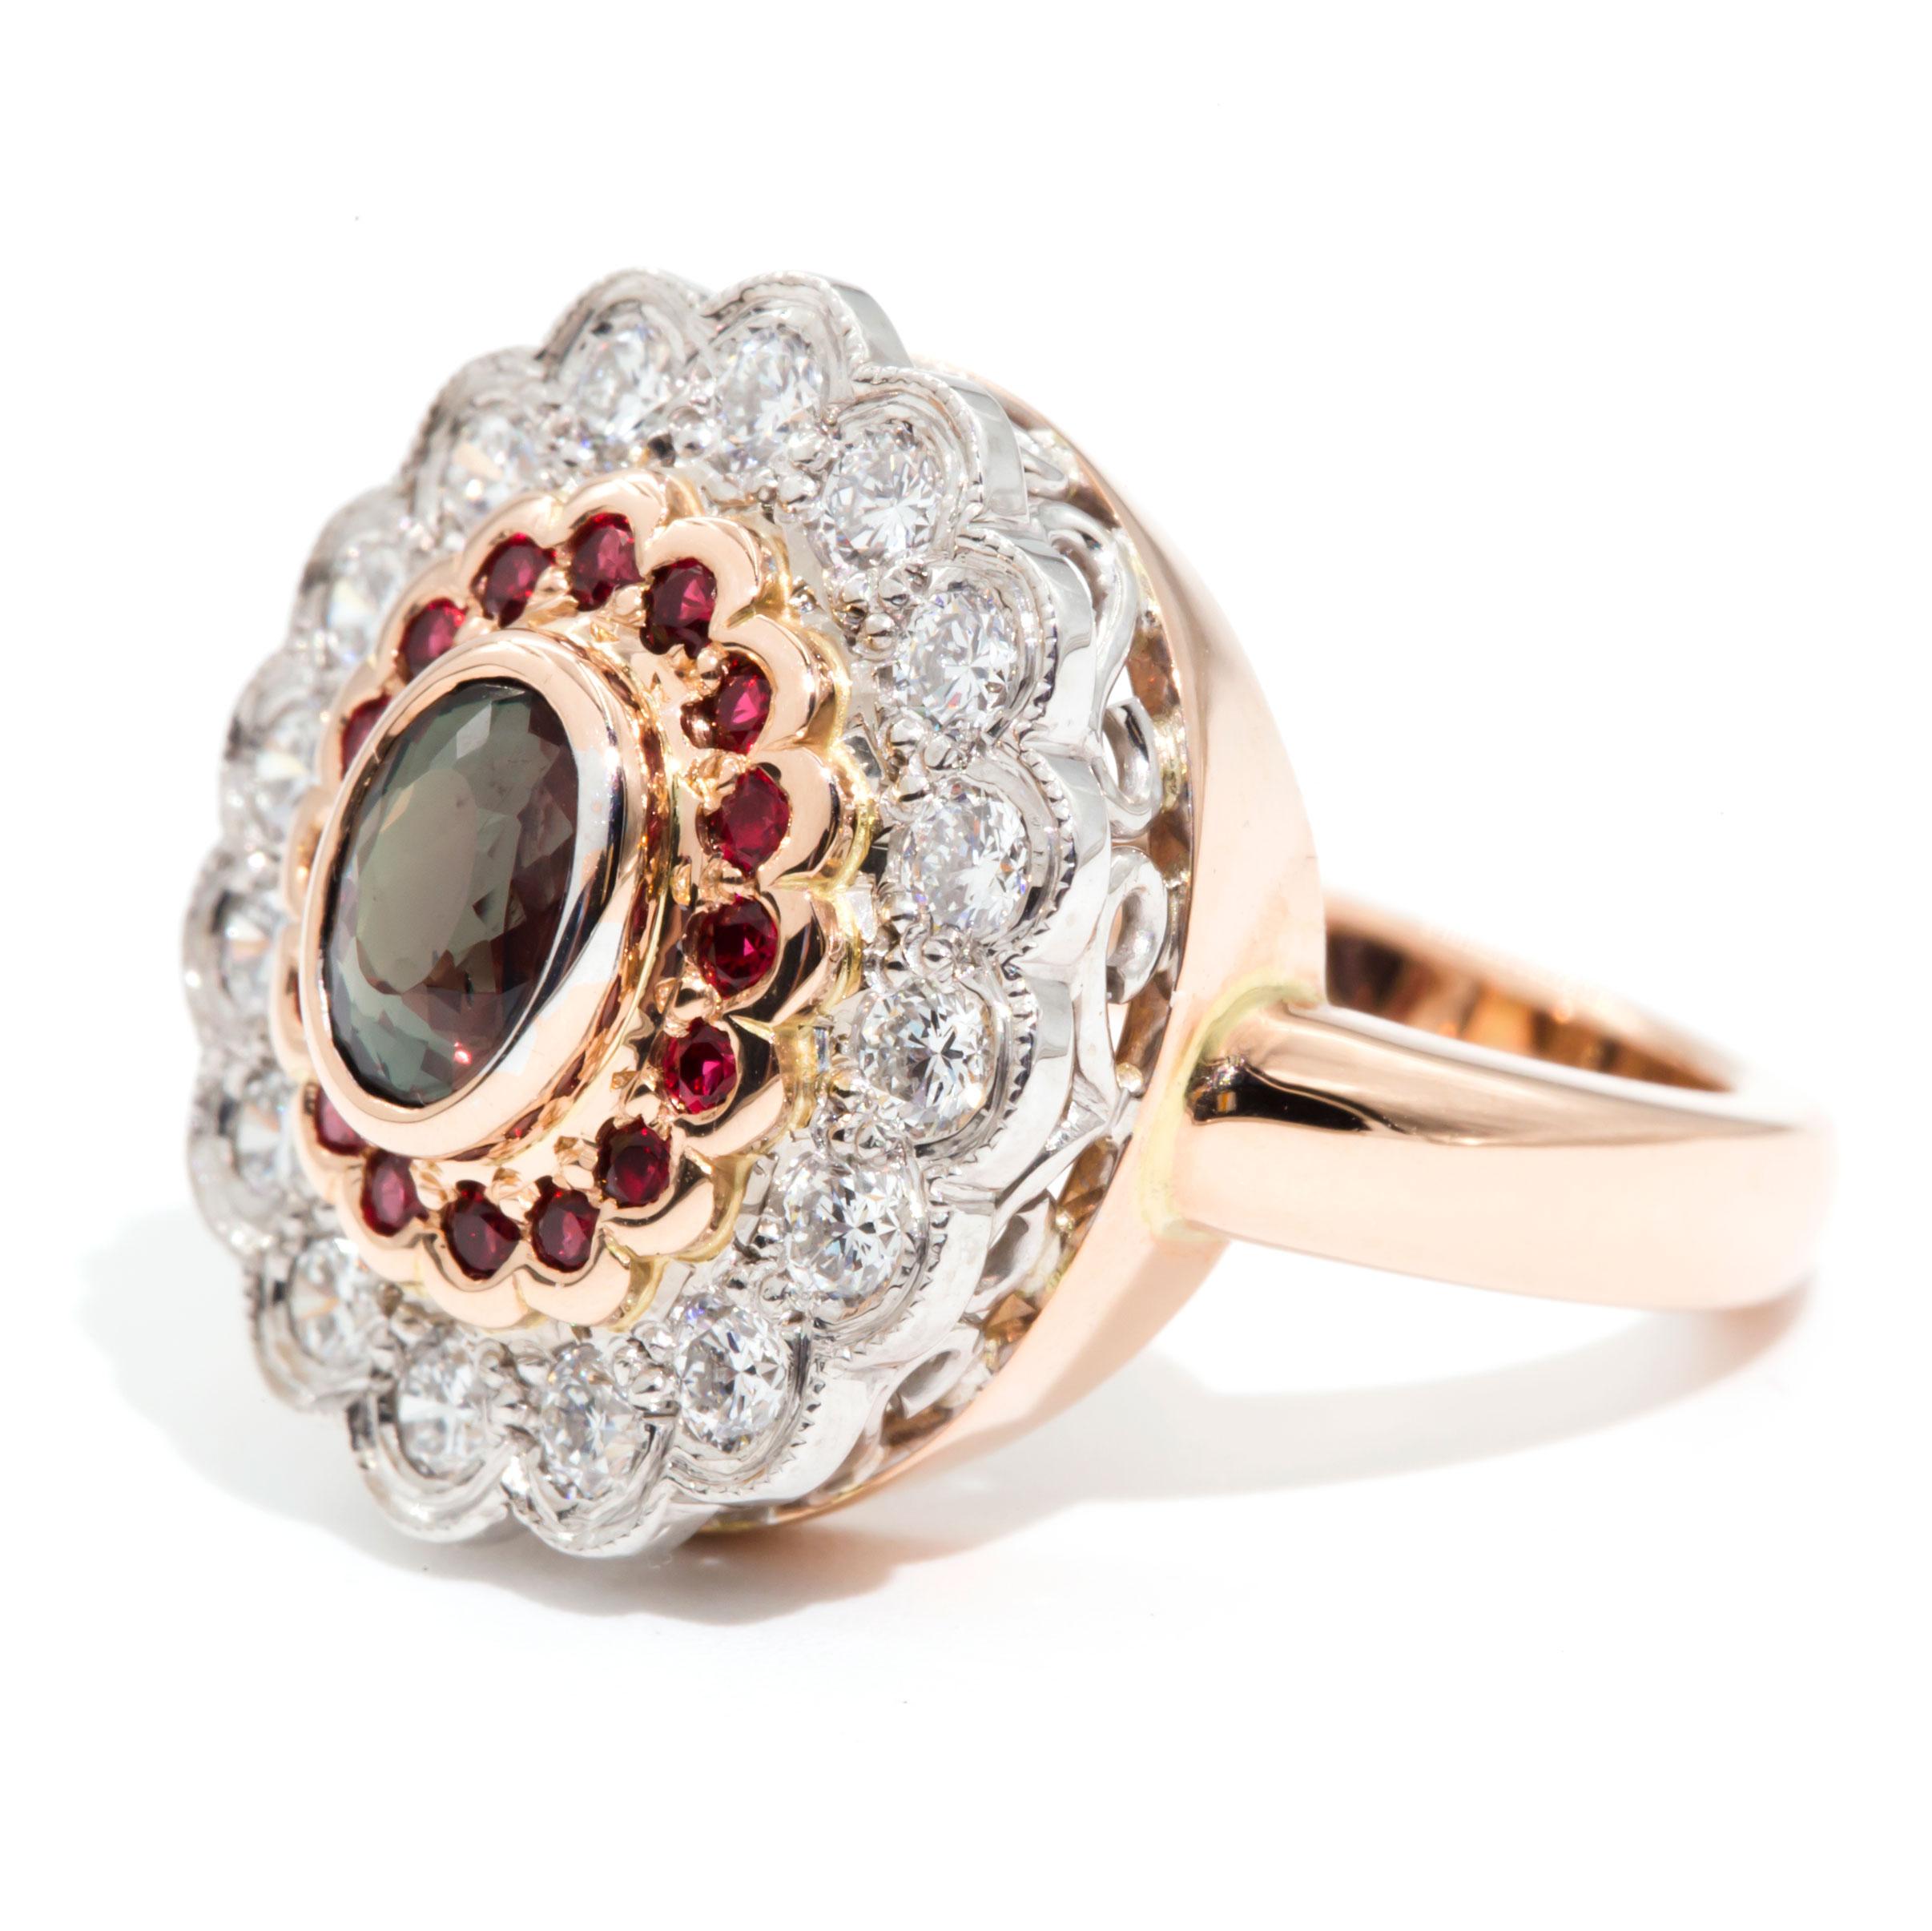 Women's 1.24 Carat Alexandrite and Red Spinel and Diamond 18 Carat Gold Cocktail Ring